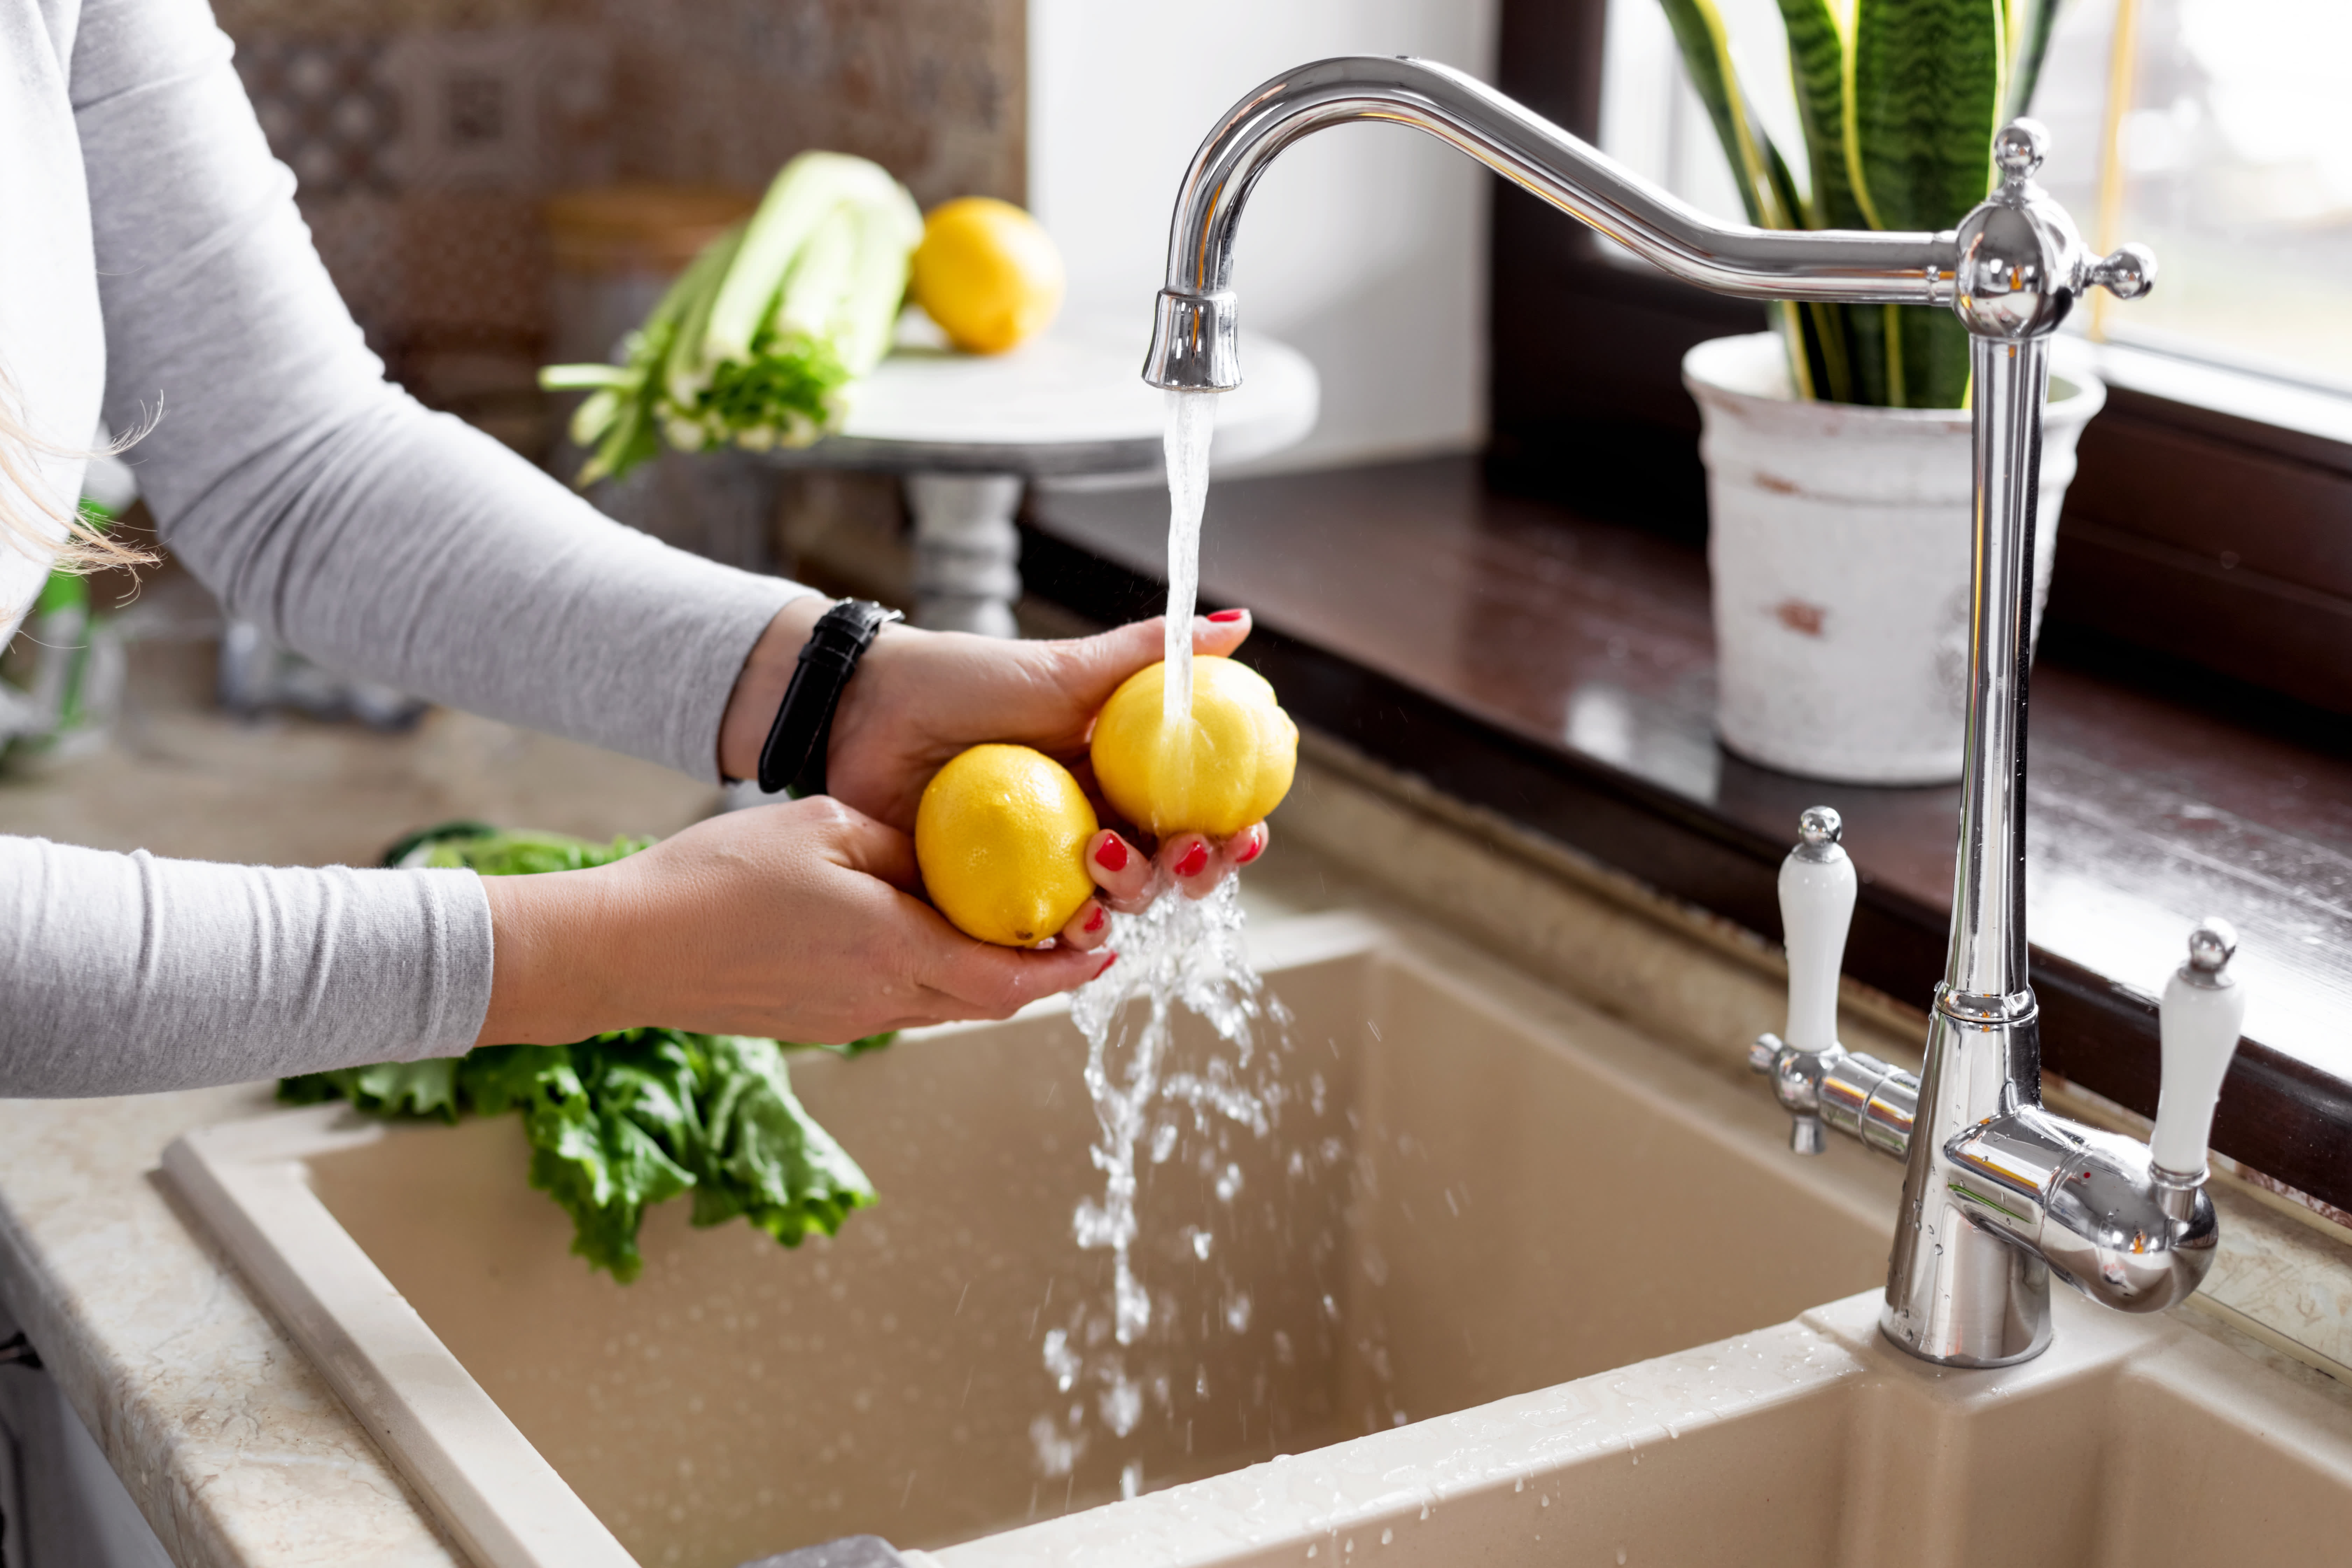 Here's How to Properly Wash Your Fruits and Veggies